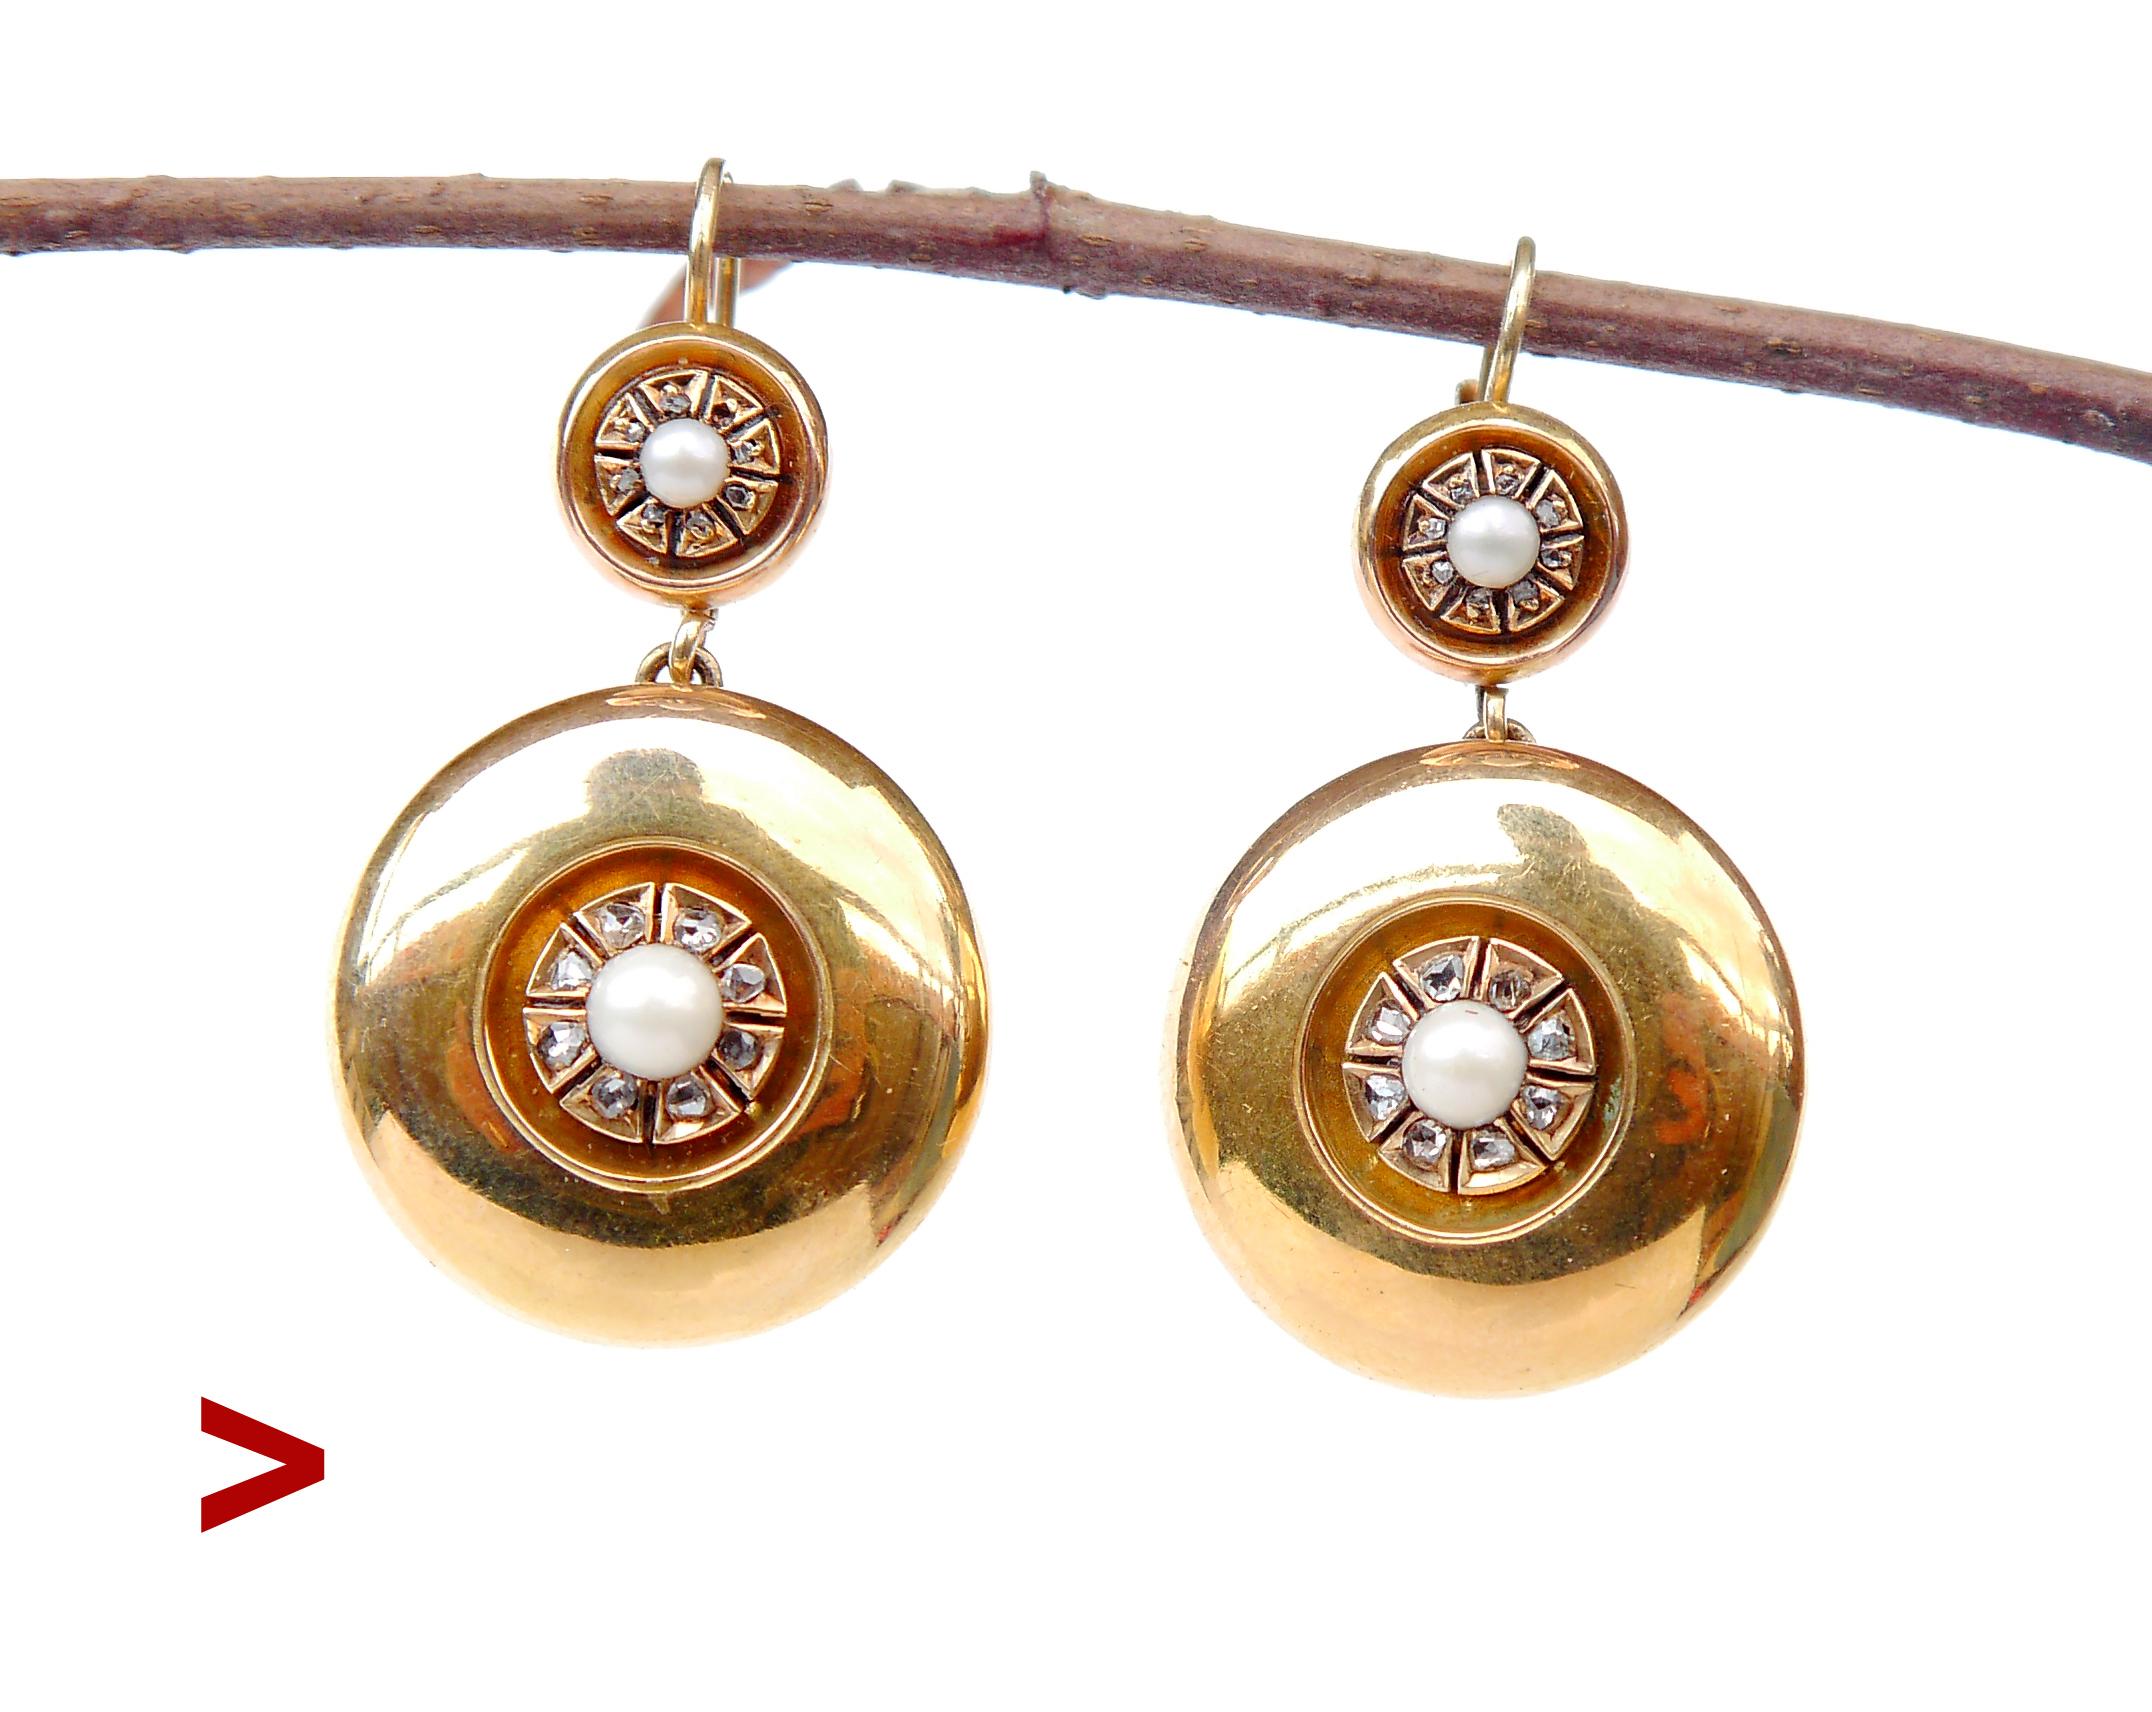 A pair of antique earrings with hollow round bodies in solid 14K Yellow Gold decorated with natural river half - Pearls and rose- cut Diamonds.

This pair dates from Europe, made in the early 1900s. No hallmarks on both, the metal was tested 14K